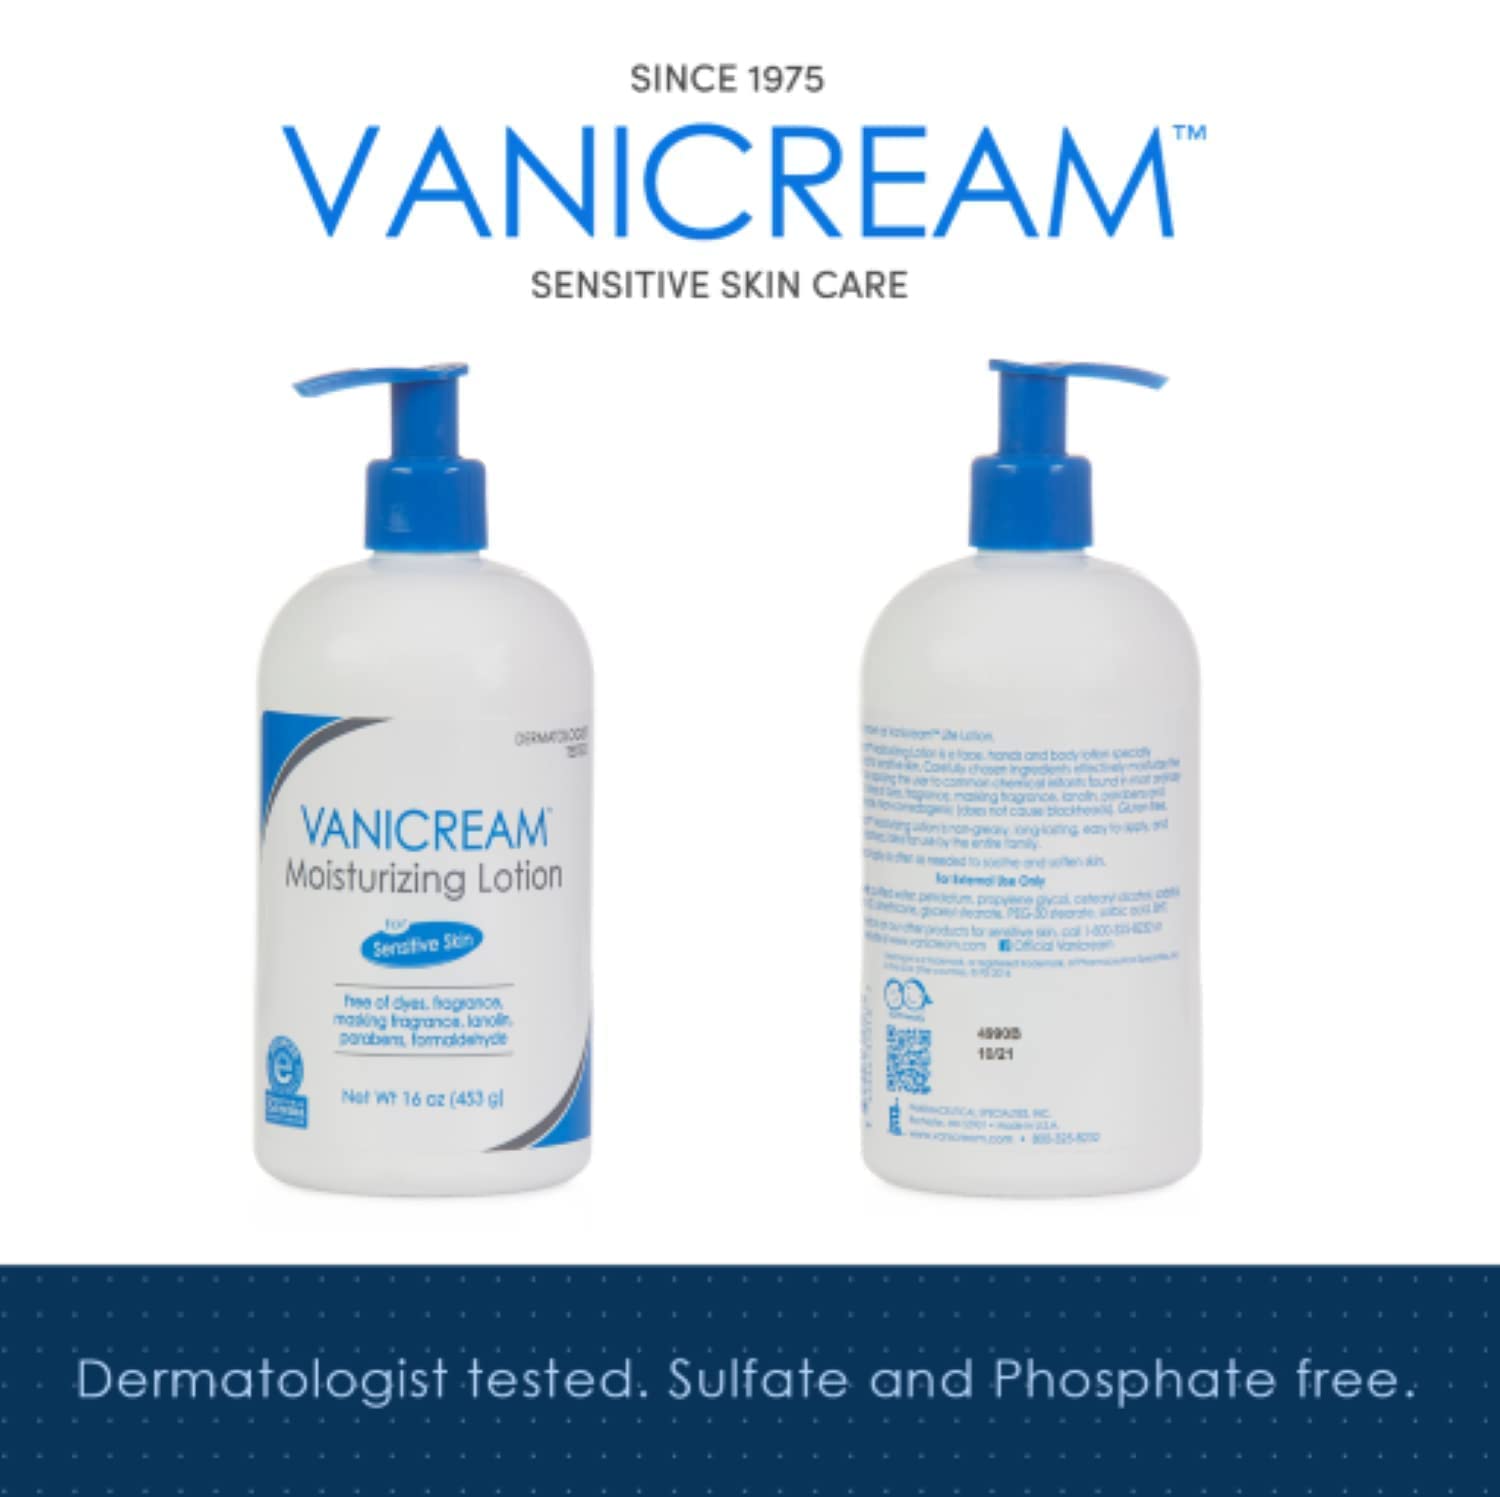 Vanicream Moisturizing Lotion with Pump Dispenser - 16 fl oz (1 lb) – Formulated Without Common Irritants for Those with Sensitive Skin